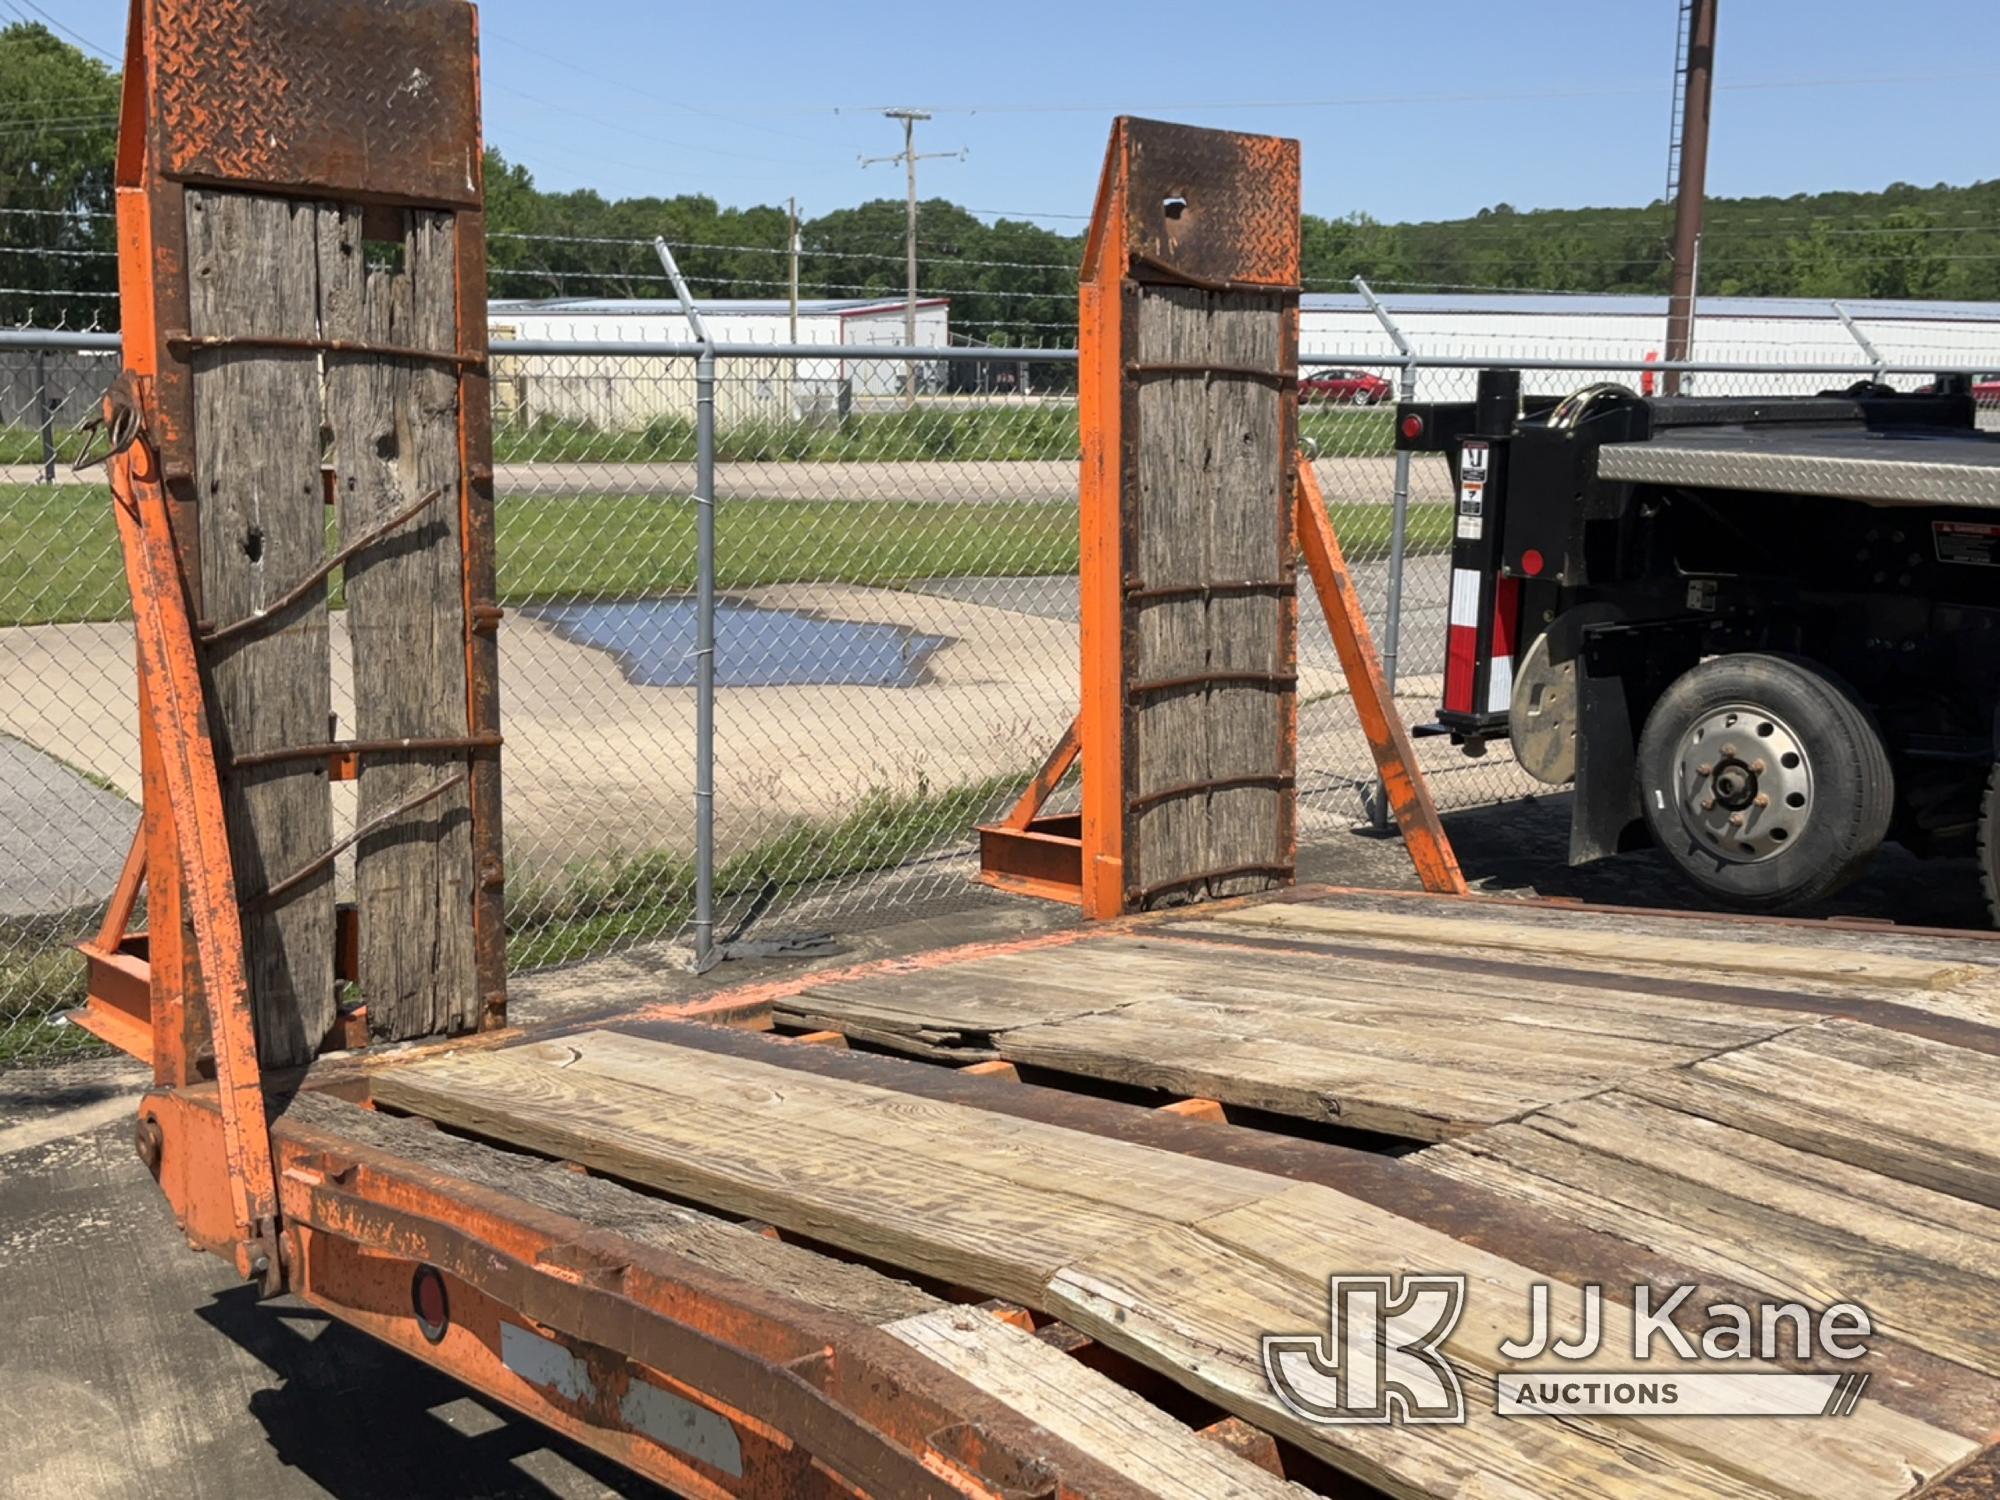 (Conway, AR) 2006 McElrath T/A Tagalong Equipment Trailer Inoperable